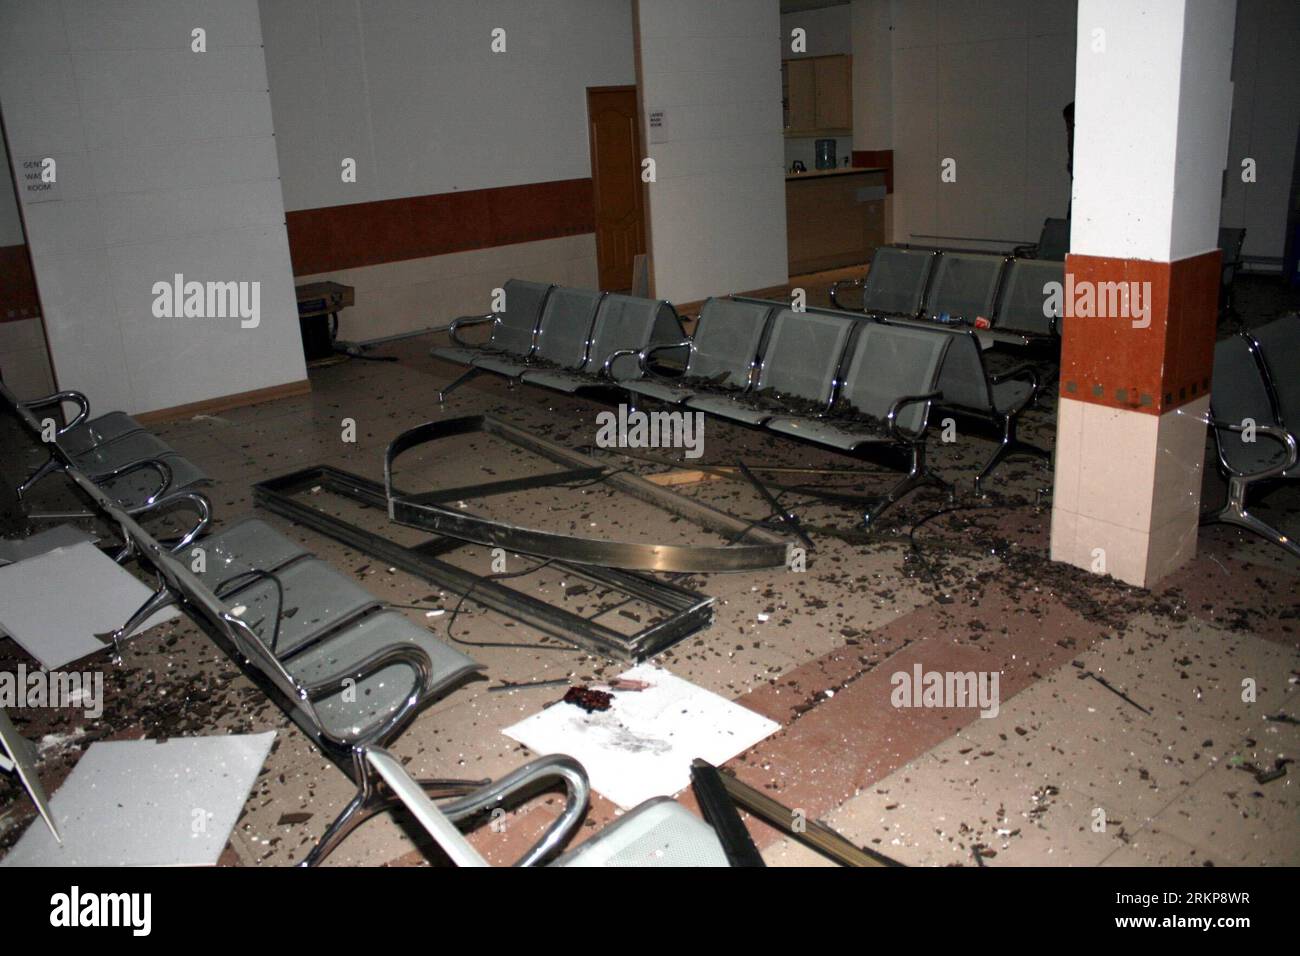 Bildnummer: 57930509  Datum: 24.04.2012  Copyright: imago/Xinhua (120424) -- LAHORE, April 24, 2012 (Xinhua) -- Damaged passengers waiting room is seen after a bomb blast at a railway station in Lahore, Pakistan, on April 24, 2012. A blast killed at least two and injured 14 others in Pakistan s eastern city of Lahore Tuesday evening, police and witnesses said. (Xinhua/Jamil Ahmed) (lyx) PAKISTAN-LAHORE-RAILWAY STATION-BLAST PUBLICATIONxNOTxINxCHN Gesellschaft Terror Anschlag Terroranschlag Bombe Bombenanschlag xjh x0x 2012 quer premiumd      57930509 Date 24 04 2012 Copyright Imago XINHUA  Lah Stock Photo